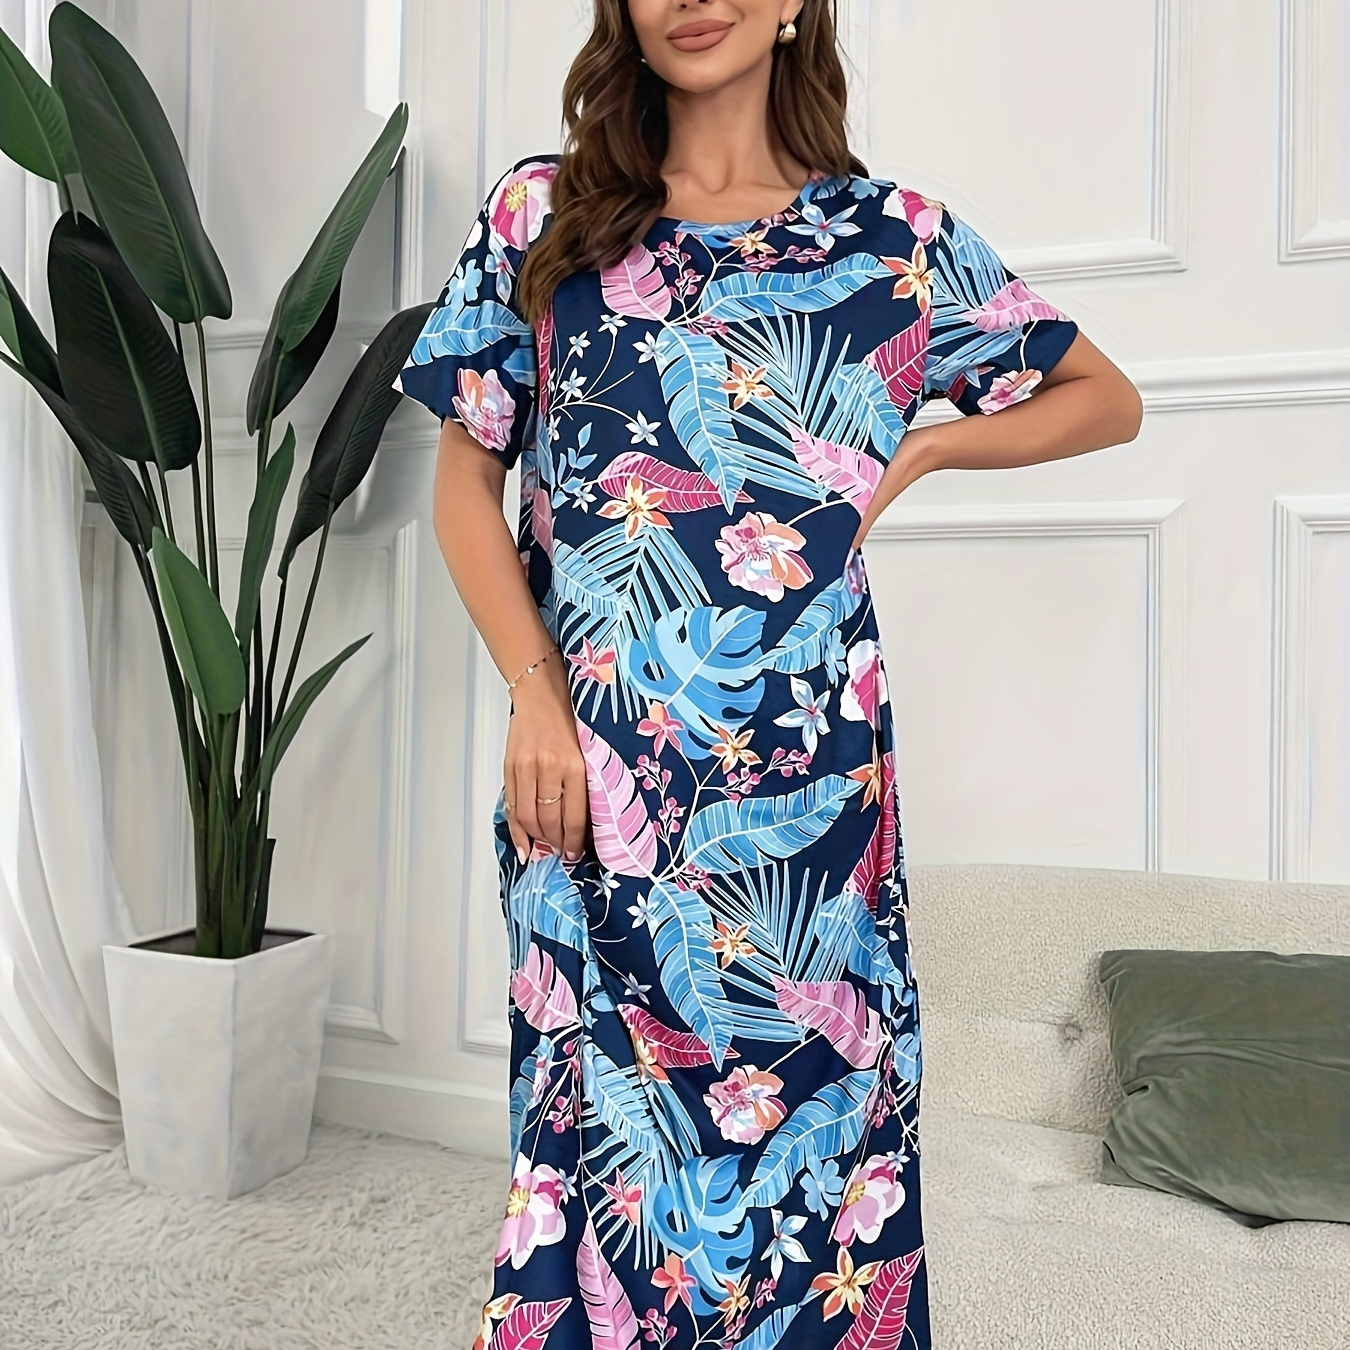 

Women's Tropical Print Casual Sleepwear Dress, Short Sleeve Round Neck Loose Fit Tee Dress, Comfortable Nightgown